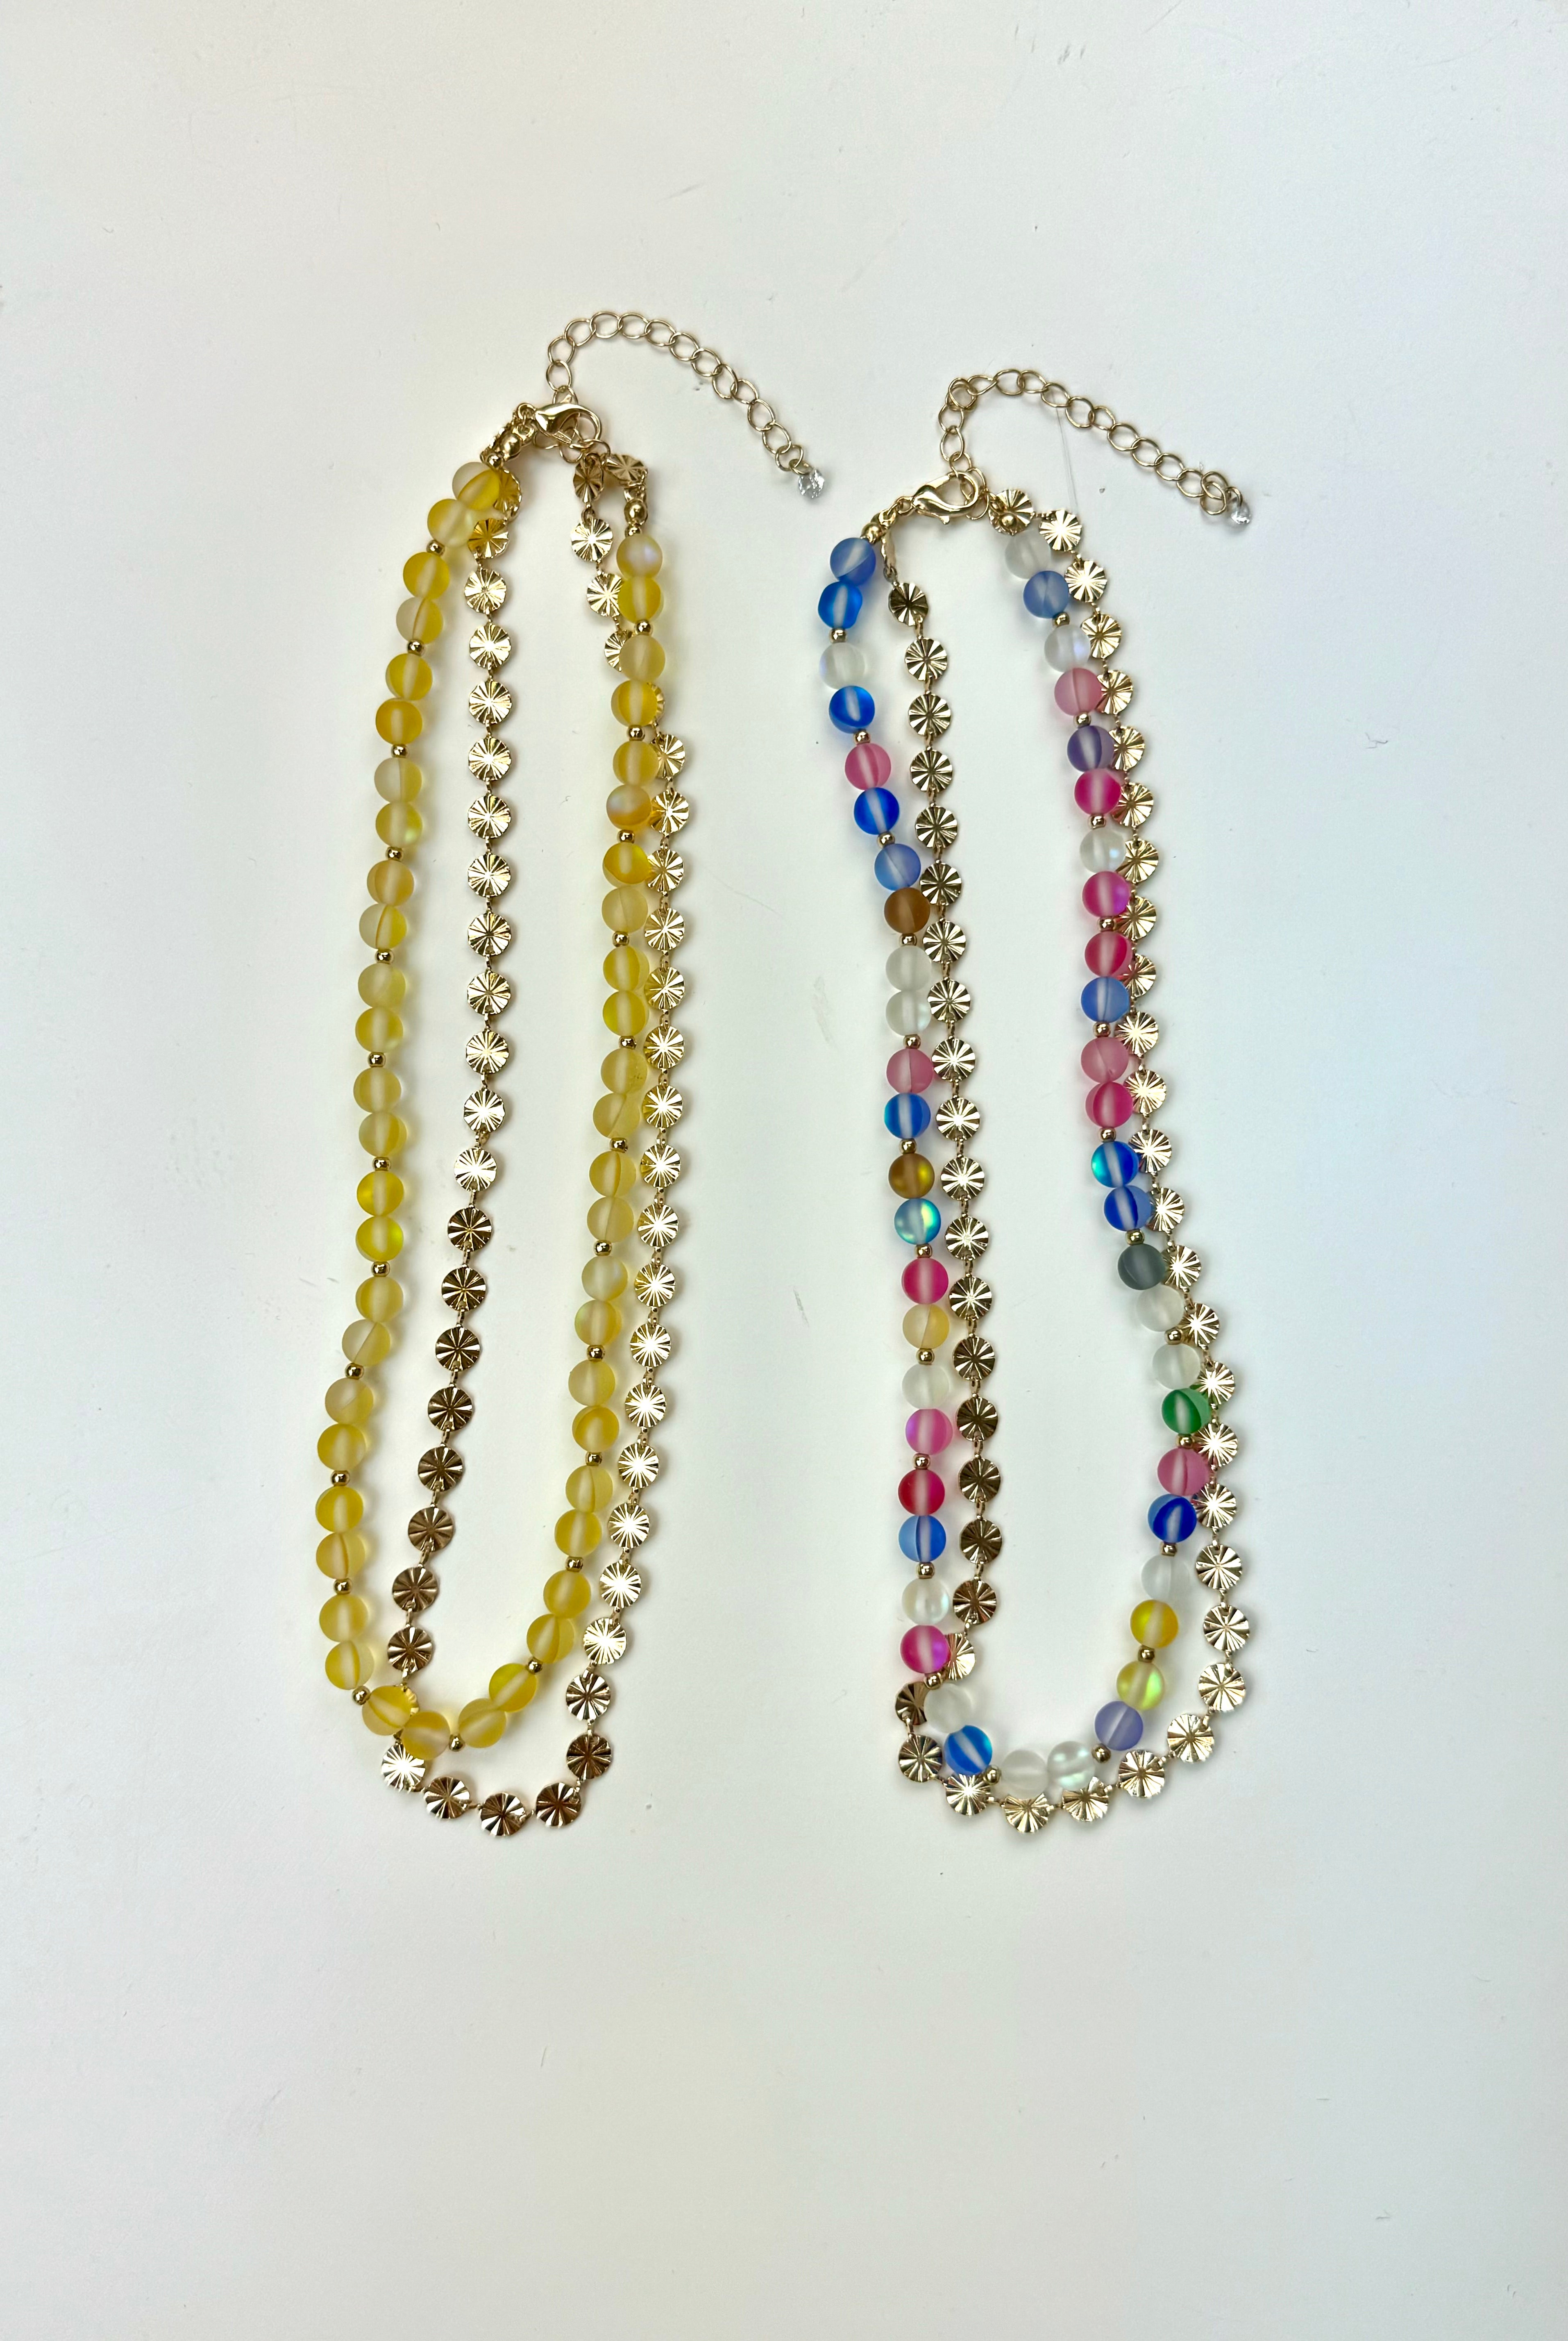 Sunshine on My Mind Necklace-Necklaces-The Lovely Closet-The Lovely Closet, Women's Fashion Boutique in Alexandria, KY